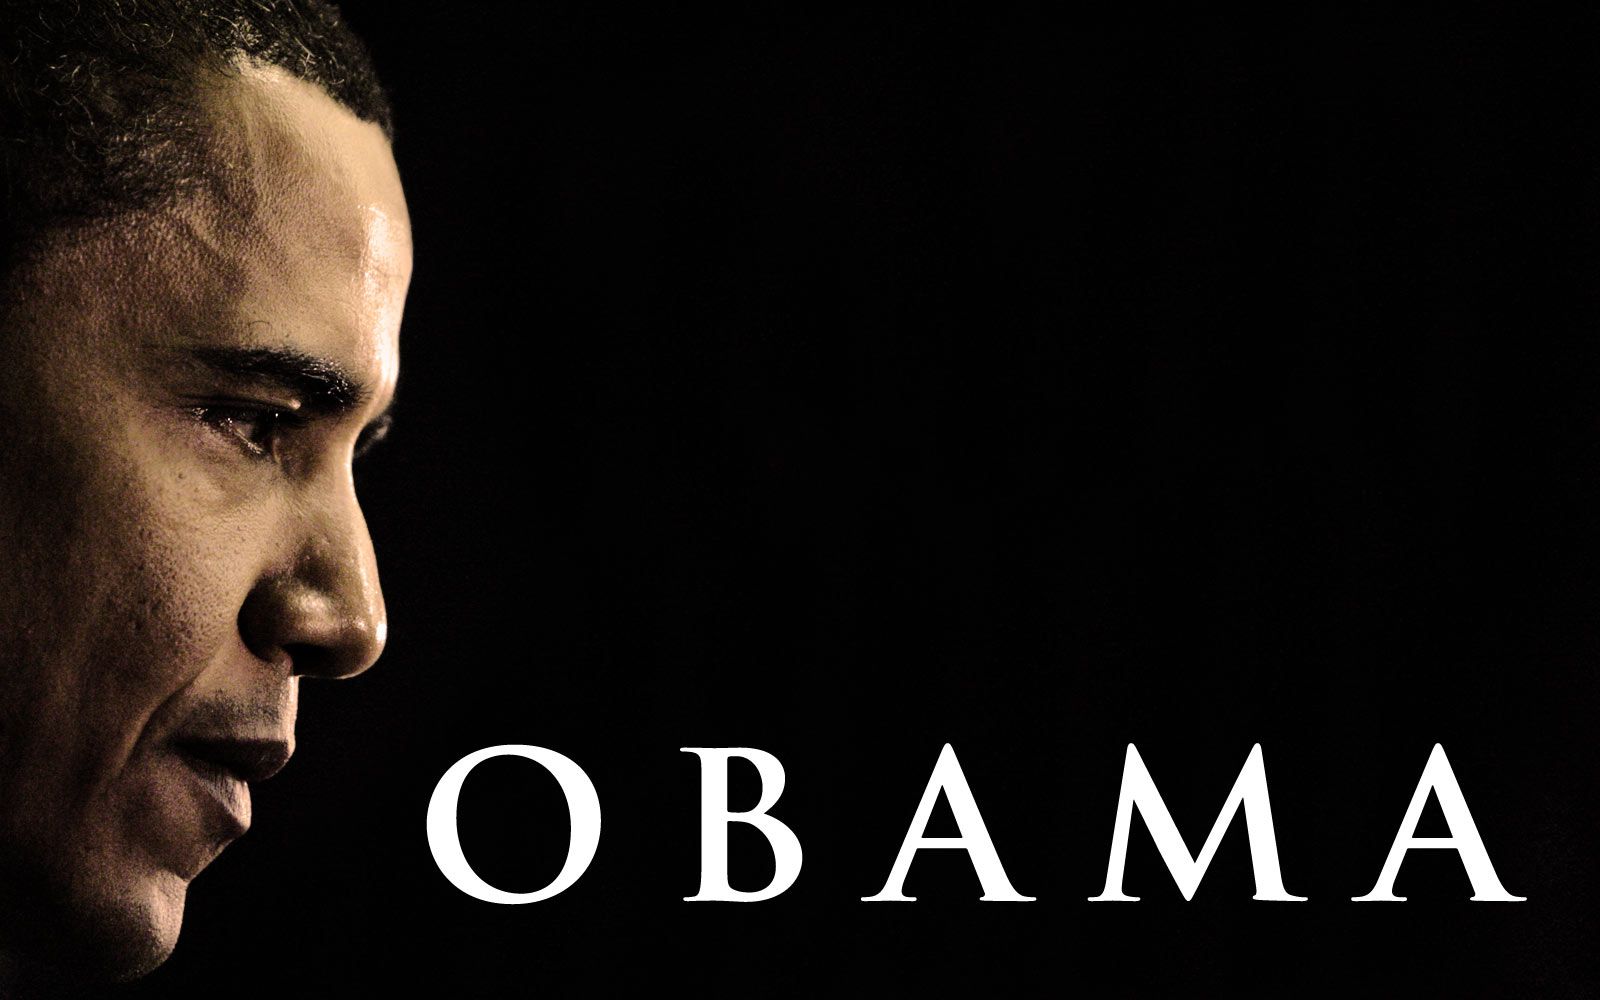 Barack Obama Wallpapers Full HD Pictures